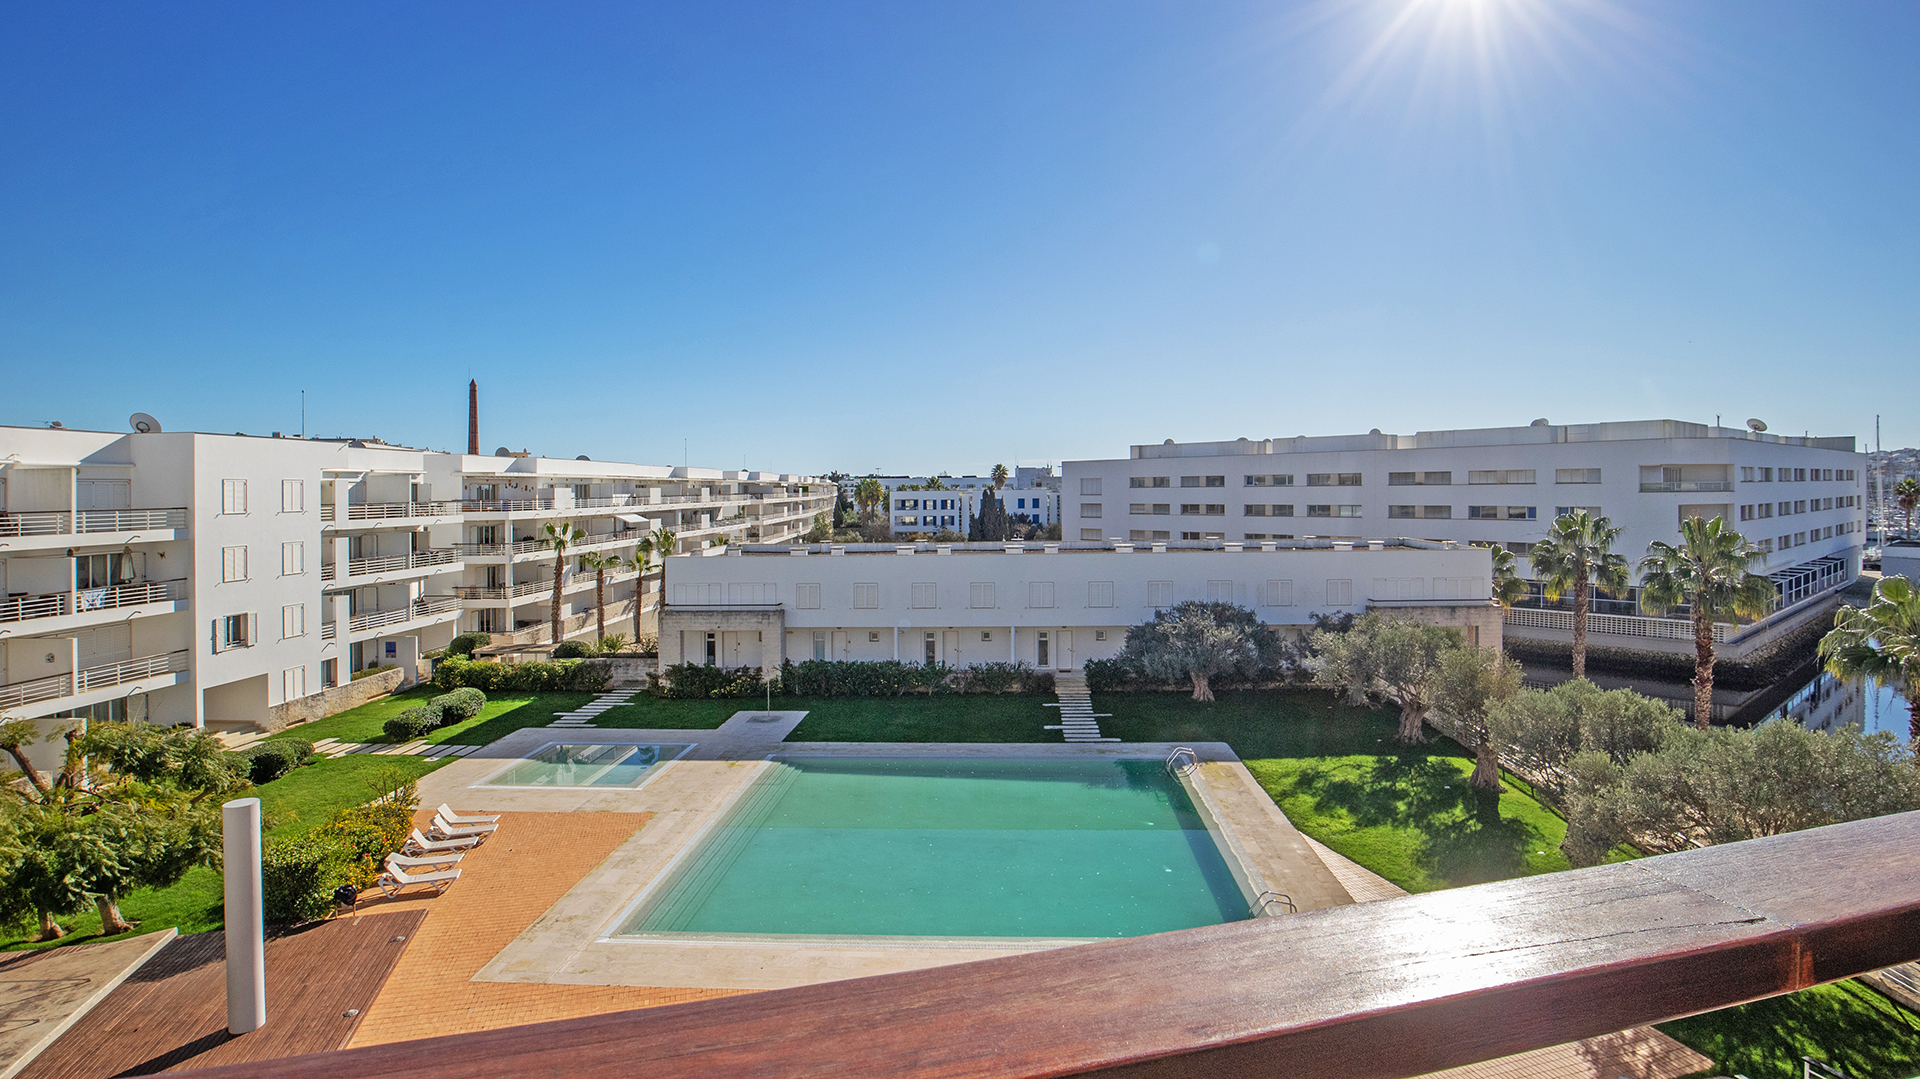 Super 2 Bedroom Marina Apartment with Communal Pool, Lagos | LG2051 Top floor, 2-bedroom, apartment in Lagos marina, with own double enclosed garage and access to a communal pool. A wonderful holiday home, within walking distance of all amenities, the historic city centre of Lagos, superb Algarve beaches and a wealth of tourist attractions! A great investment opportunity with AL license.